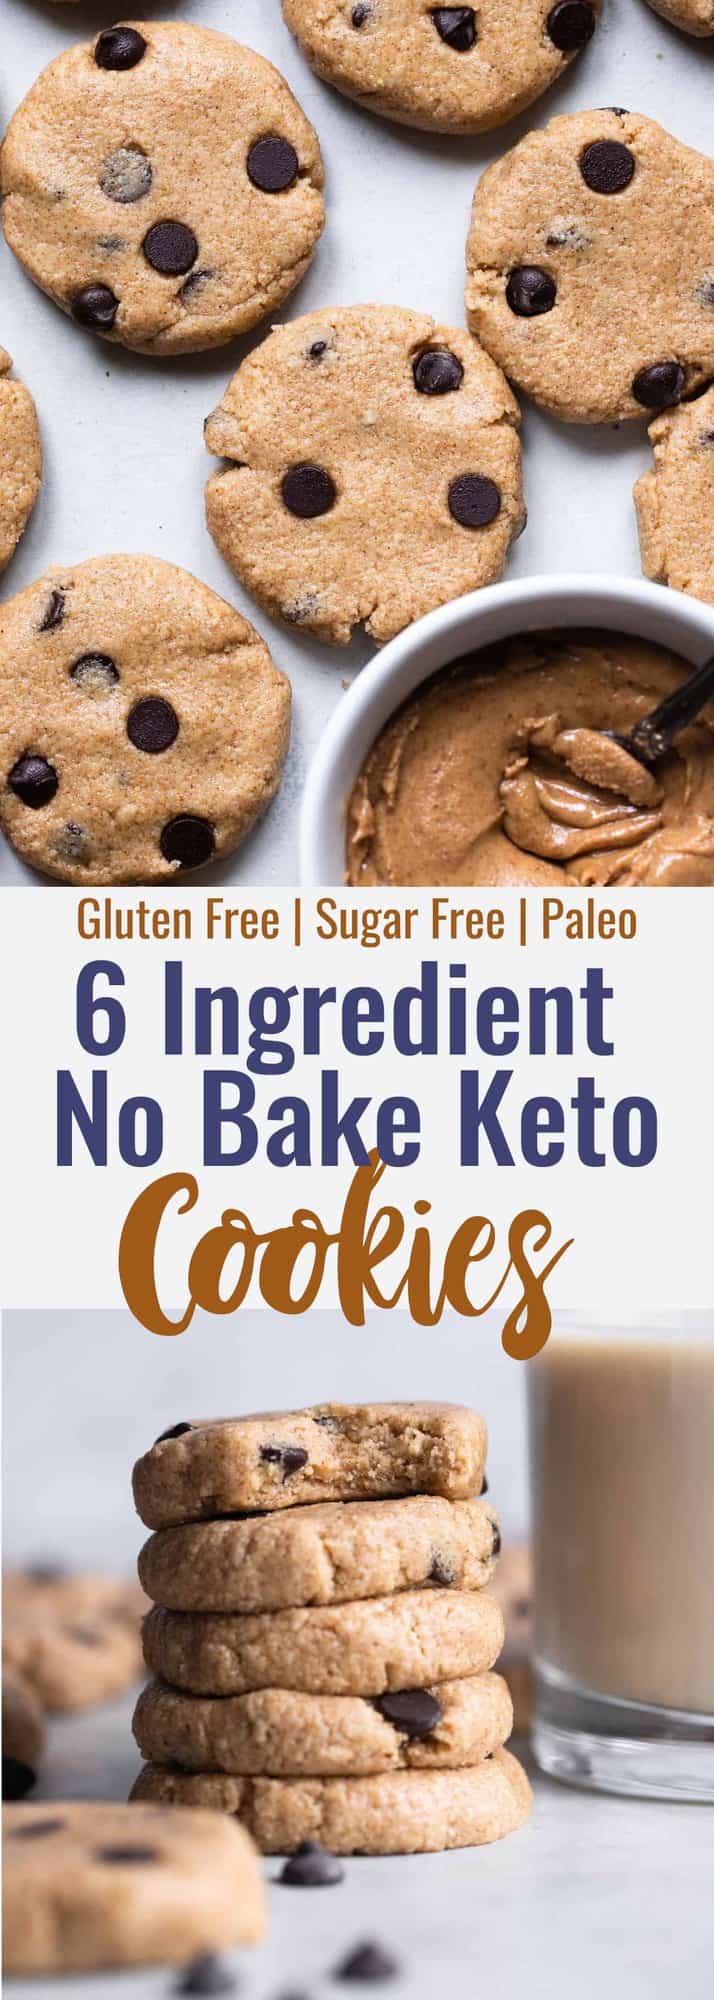 Almond Joy Keto No Bake Cookies - These soft and chewy, low carb and keto no bake cookies are sugar, gluten and dairy free but not taste free! Only 6 ingredients and super simple to make! | #Foodfaithfitness | #Glutenfree #Keto #Sugarfree #Lowcarb #Paleo